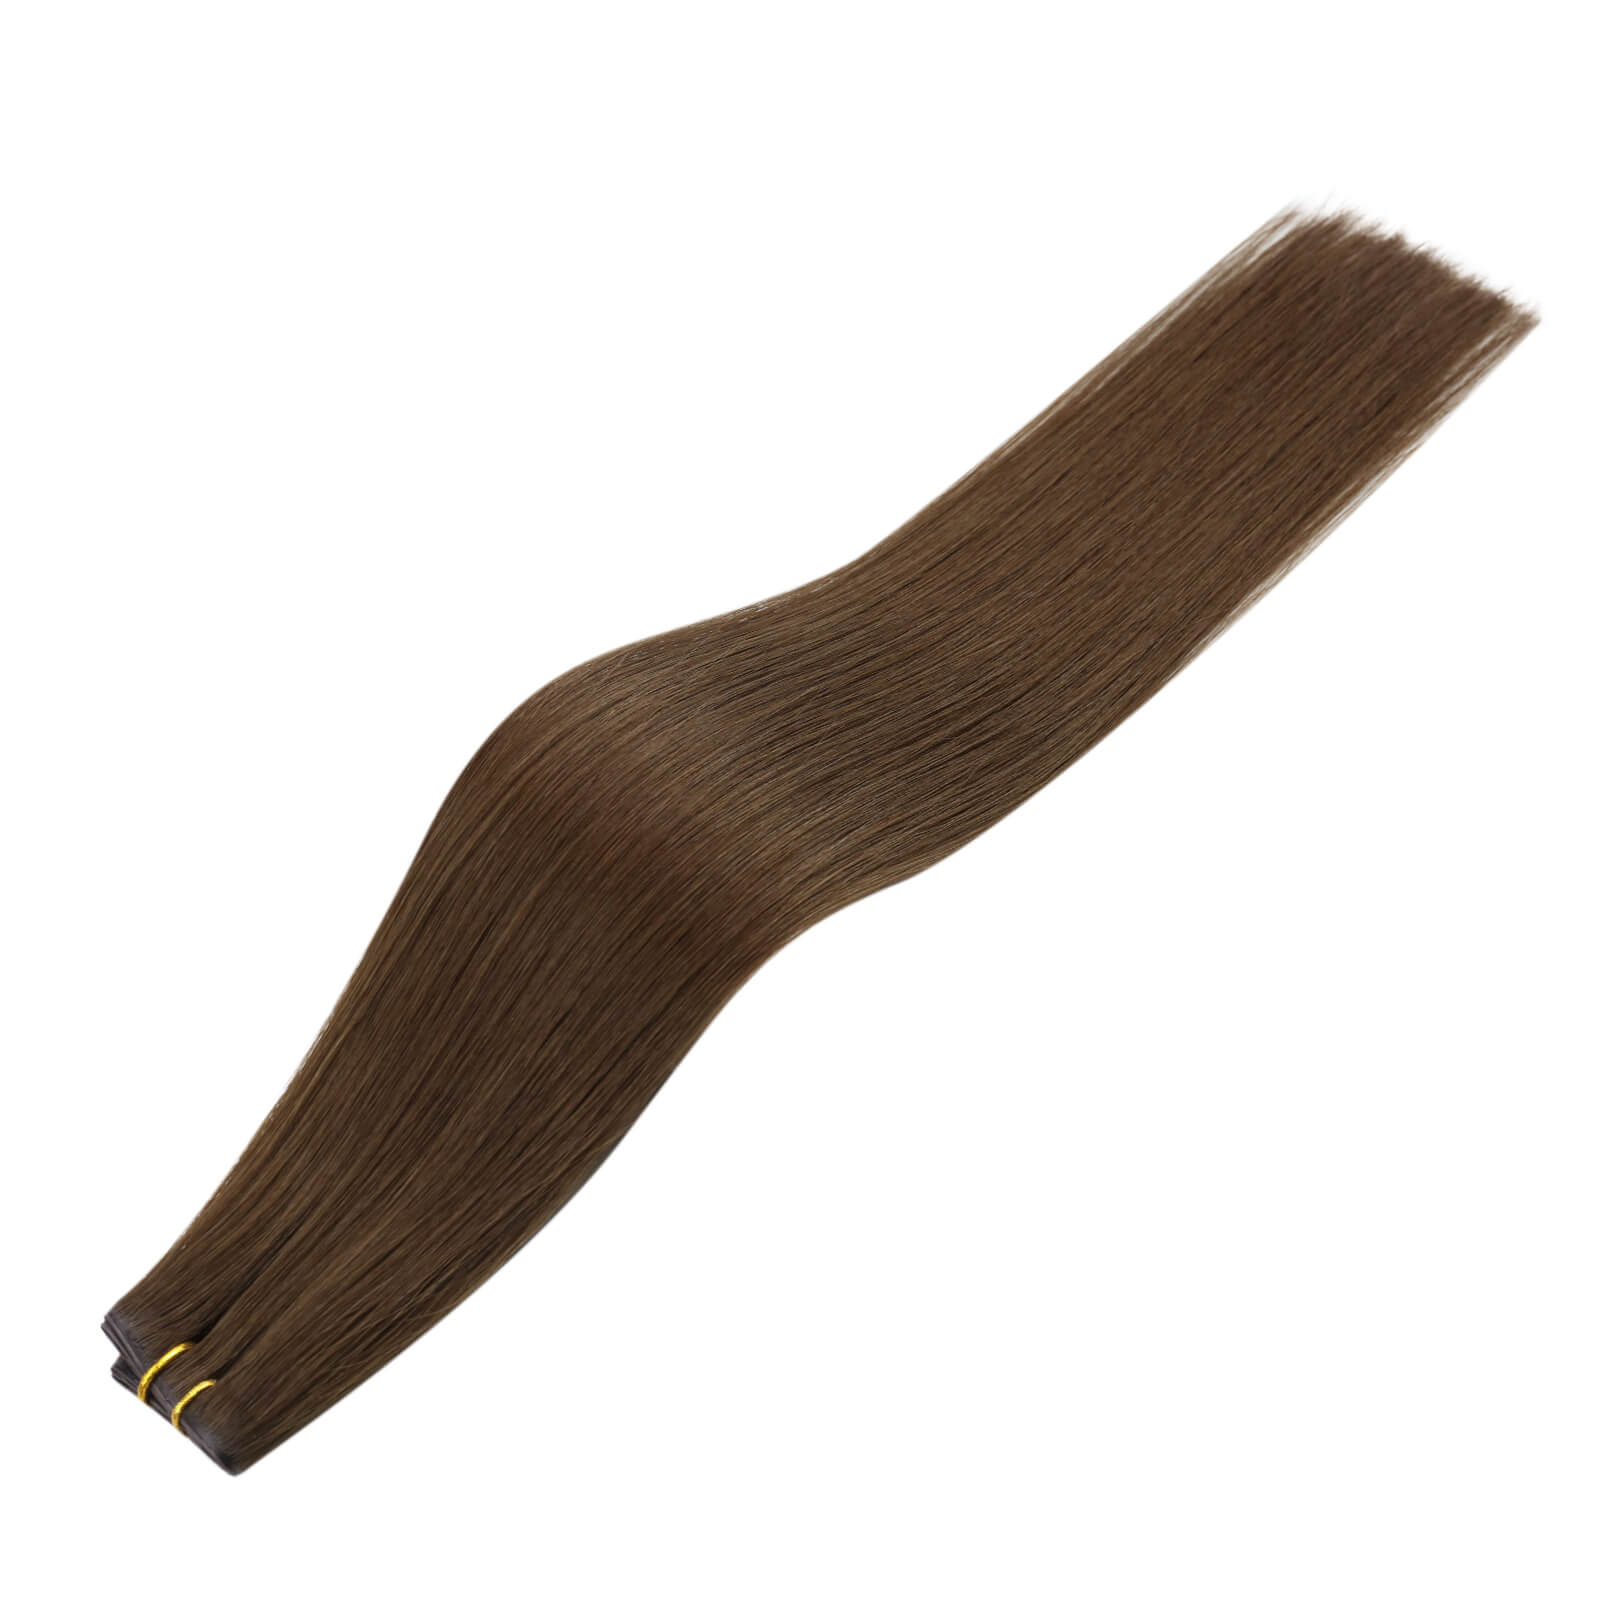 18 inch weft hair extensions for short hair,sew in weft hair extensions,pu invisible weft hair,xo weft hair,hair extensions,weft hair,hair weft,human hair